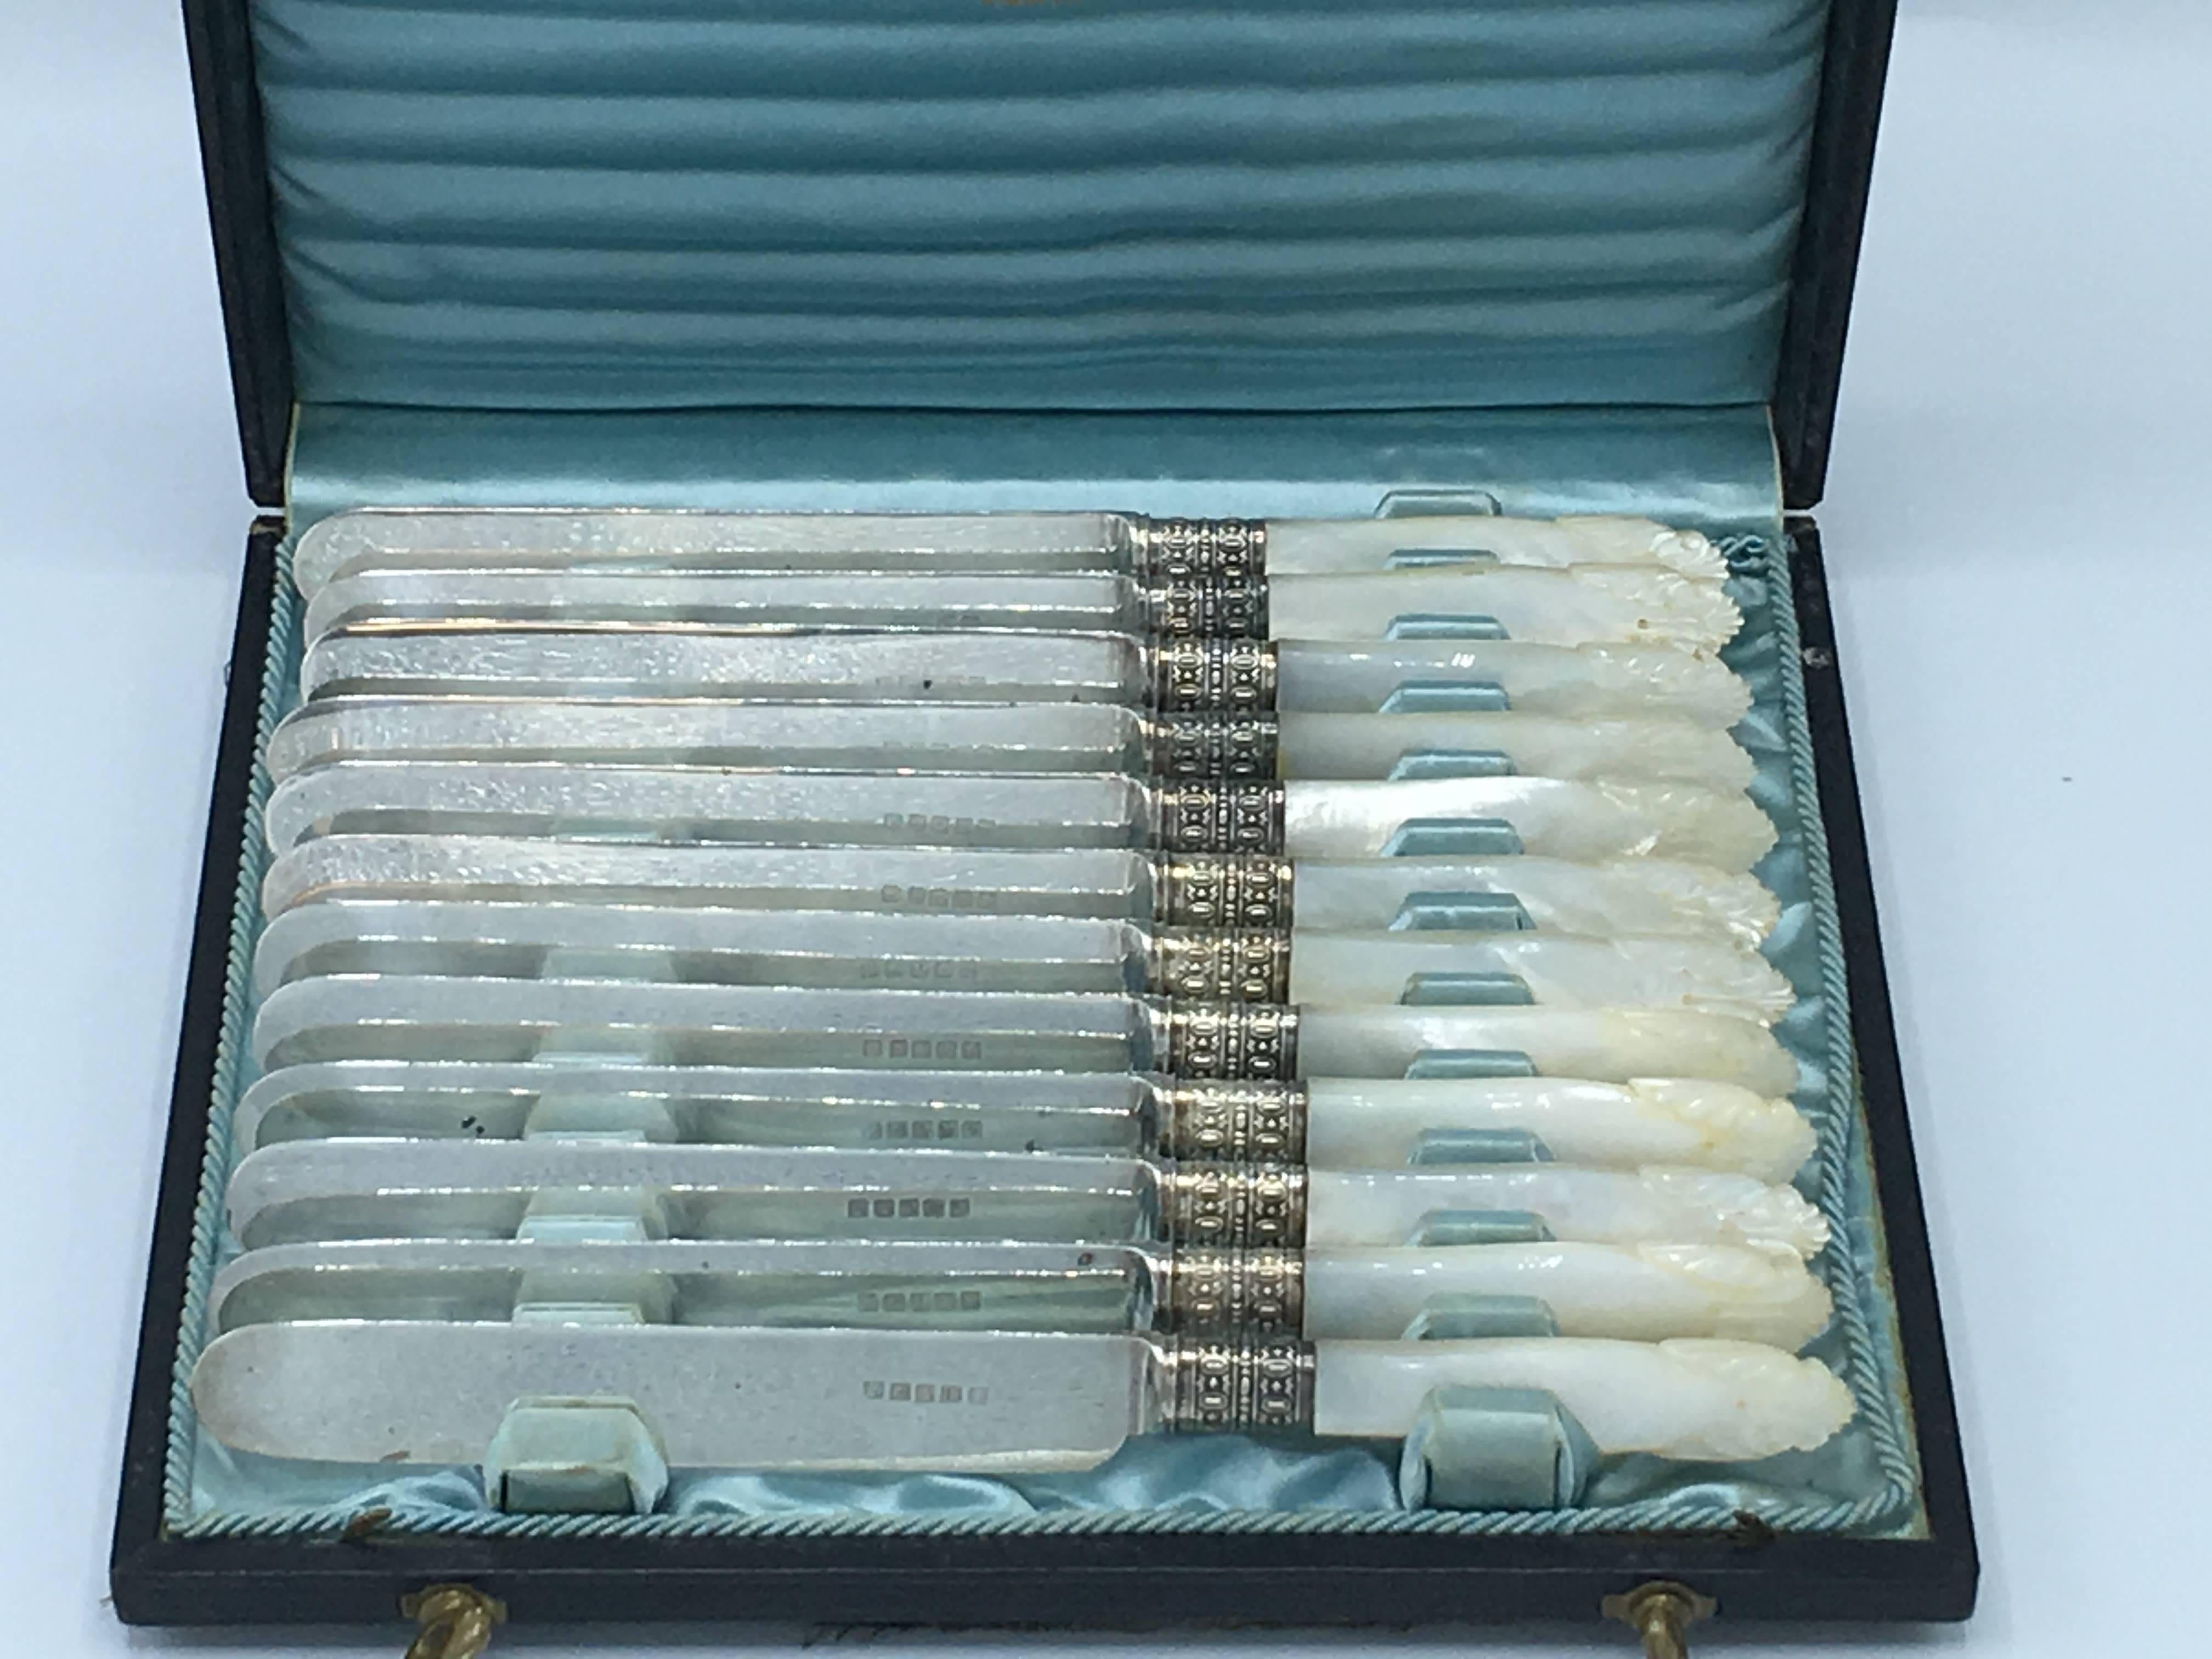 Offered is an absolutely immaculate, 19th century Tiffany & Co., set of 12, sterling silver and mother-of-pearl knives. Marked, Tiffany "Sterling Silver, K." The set includes the original box, with functioning locking mechanism. 

Each